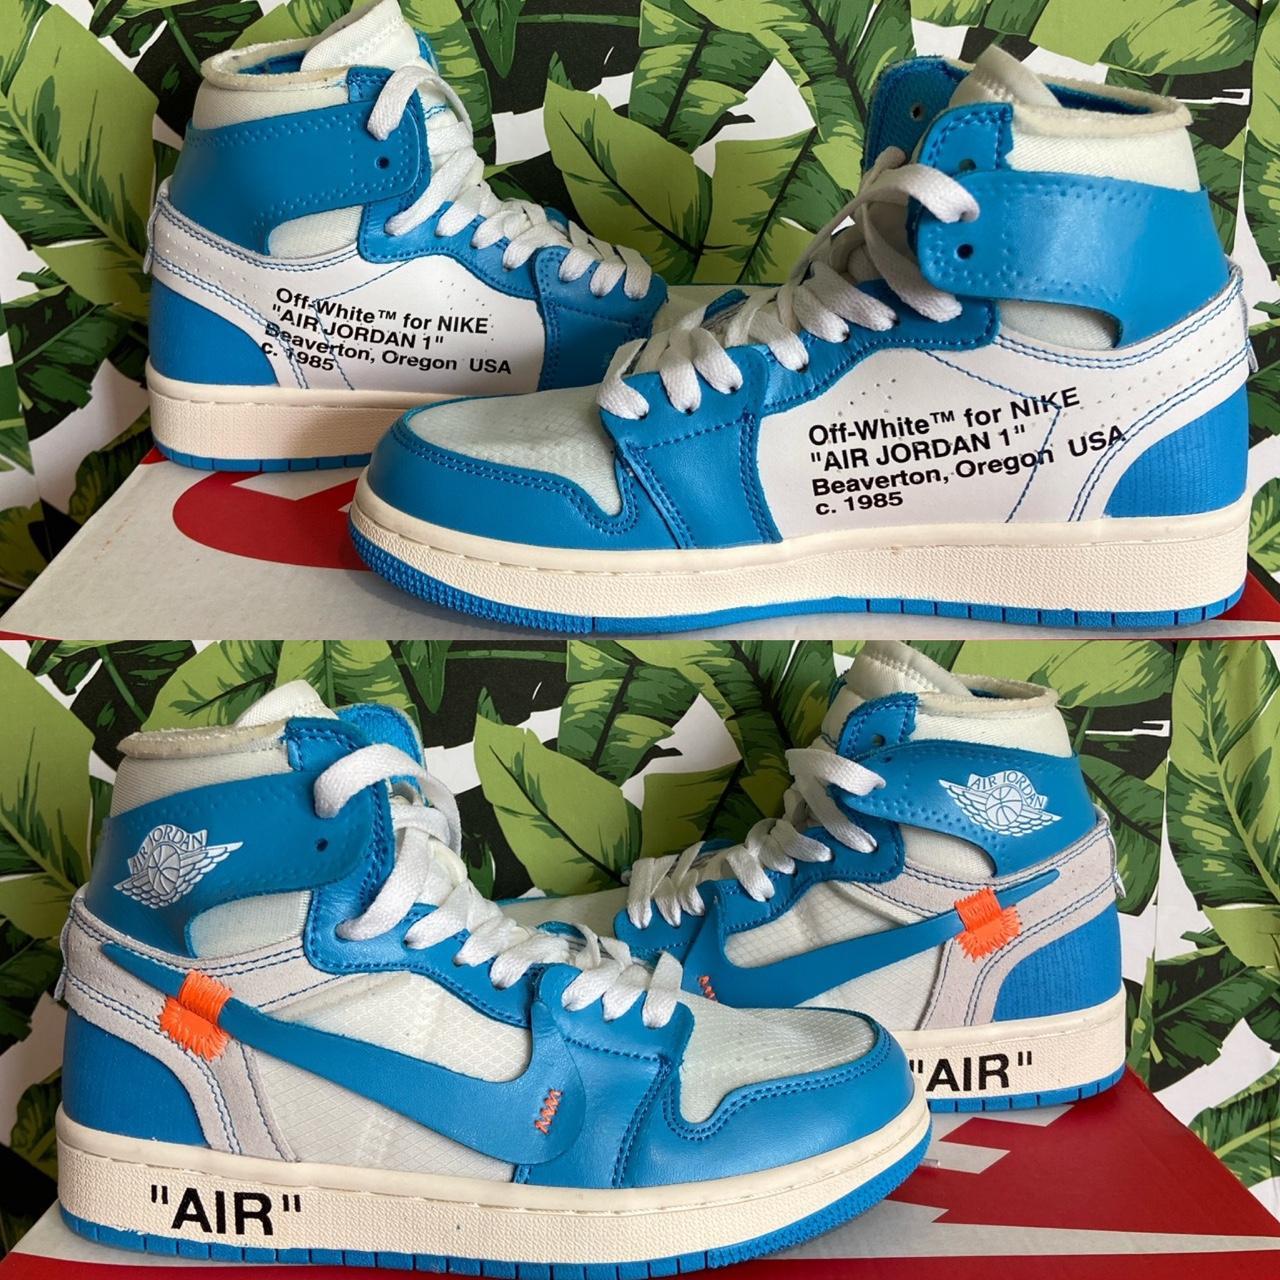 Off-White Women's White and Blue Trainers